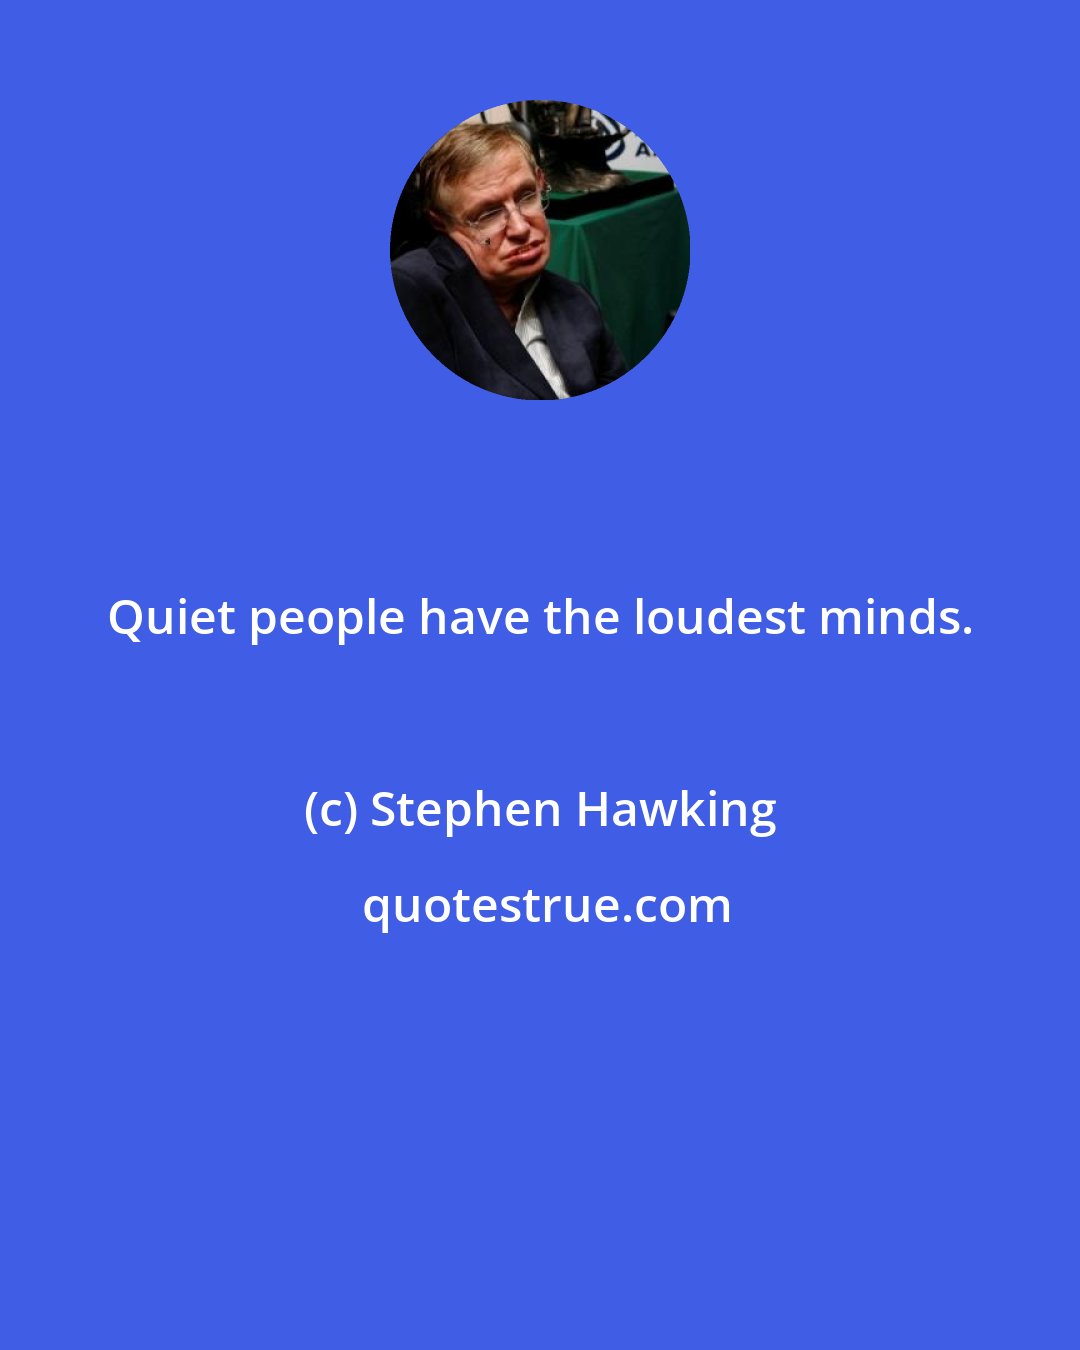 Stephen Hawking: Quiet people have the loudest minds.